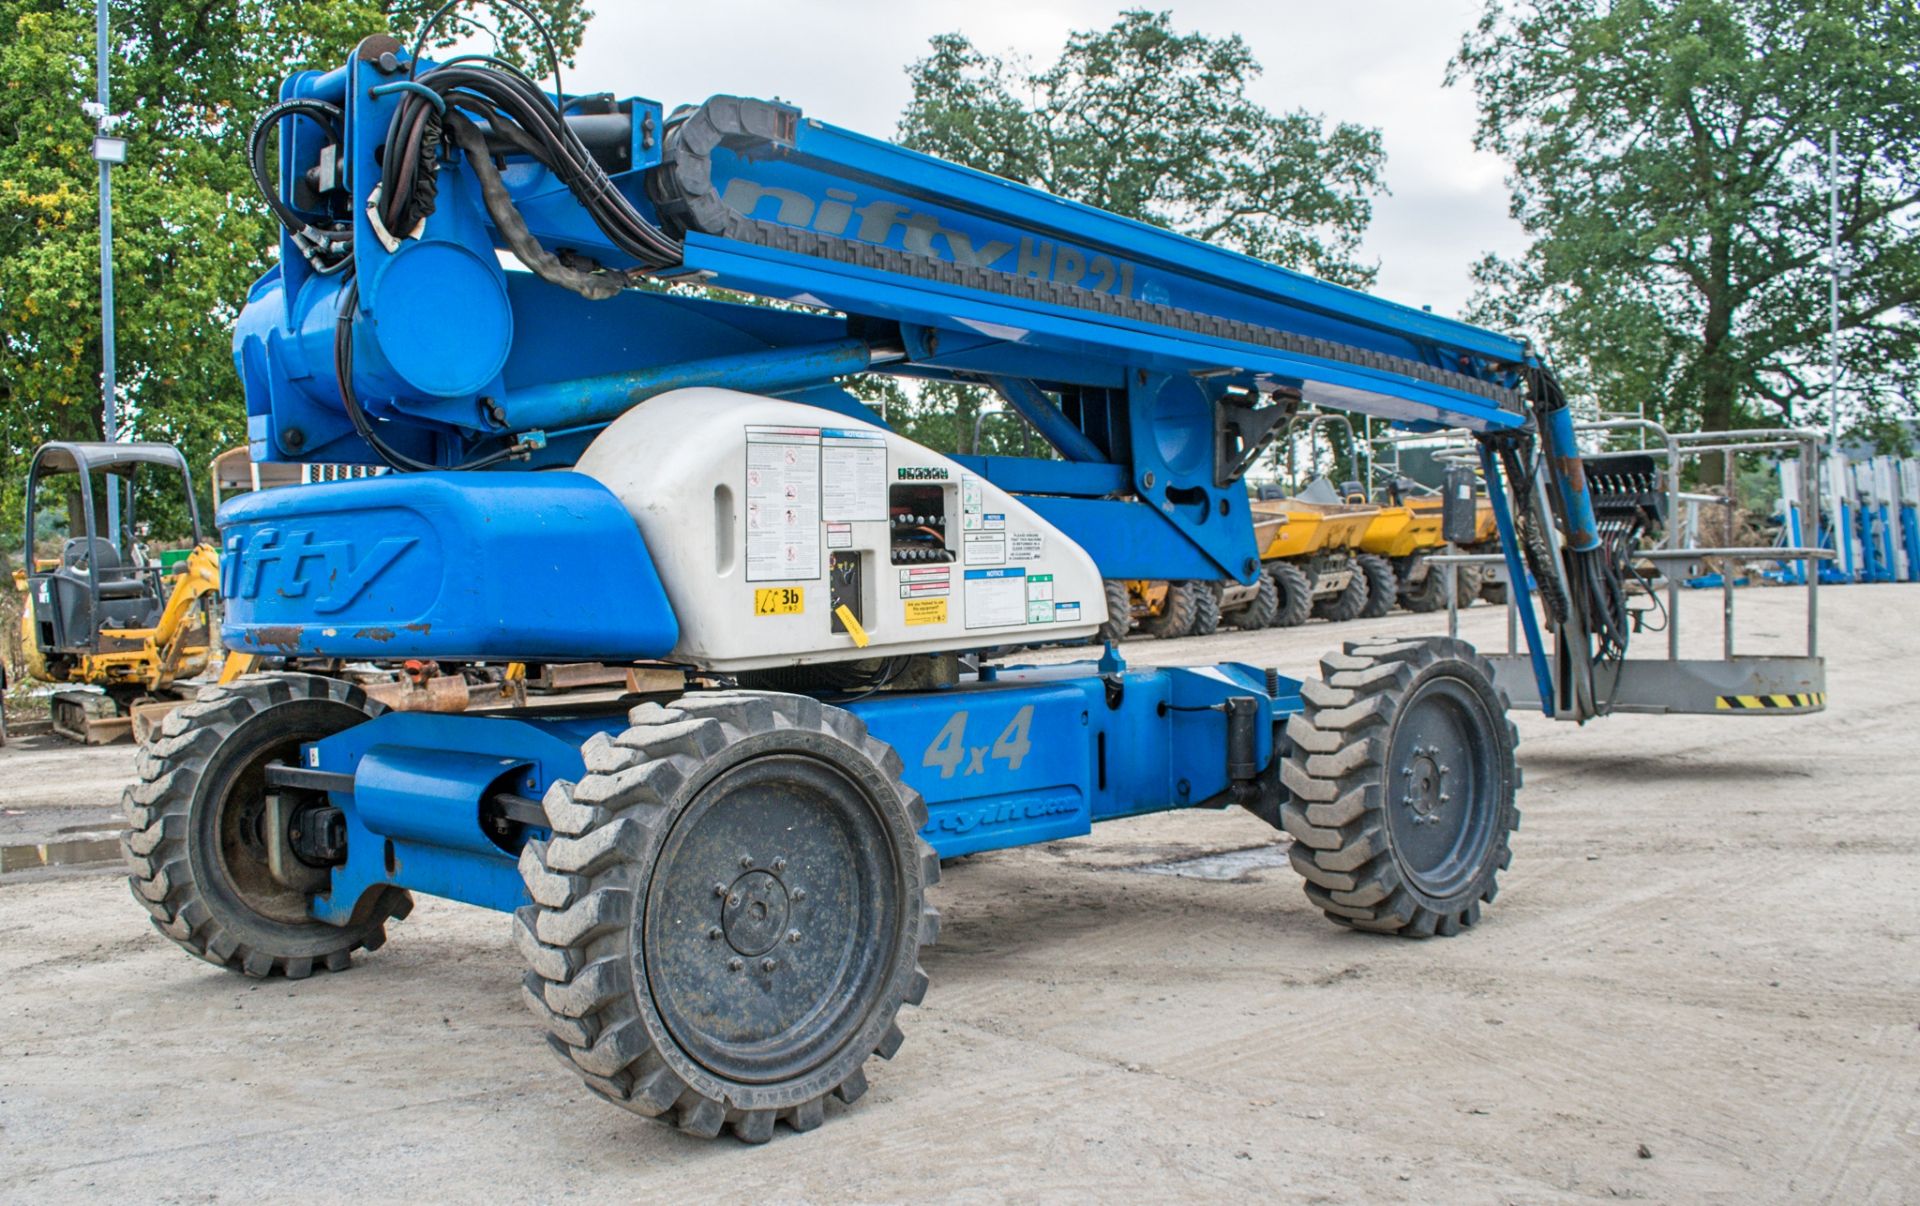 Niftylift HR 21 D diesel driven 4 wheel drive boom lift access platform  Year: 2006 S/N: 2113695 - Image 4 of 12